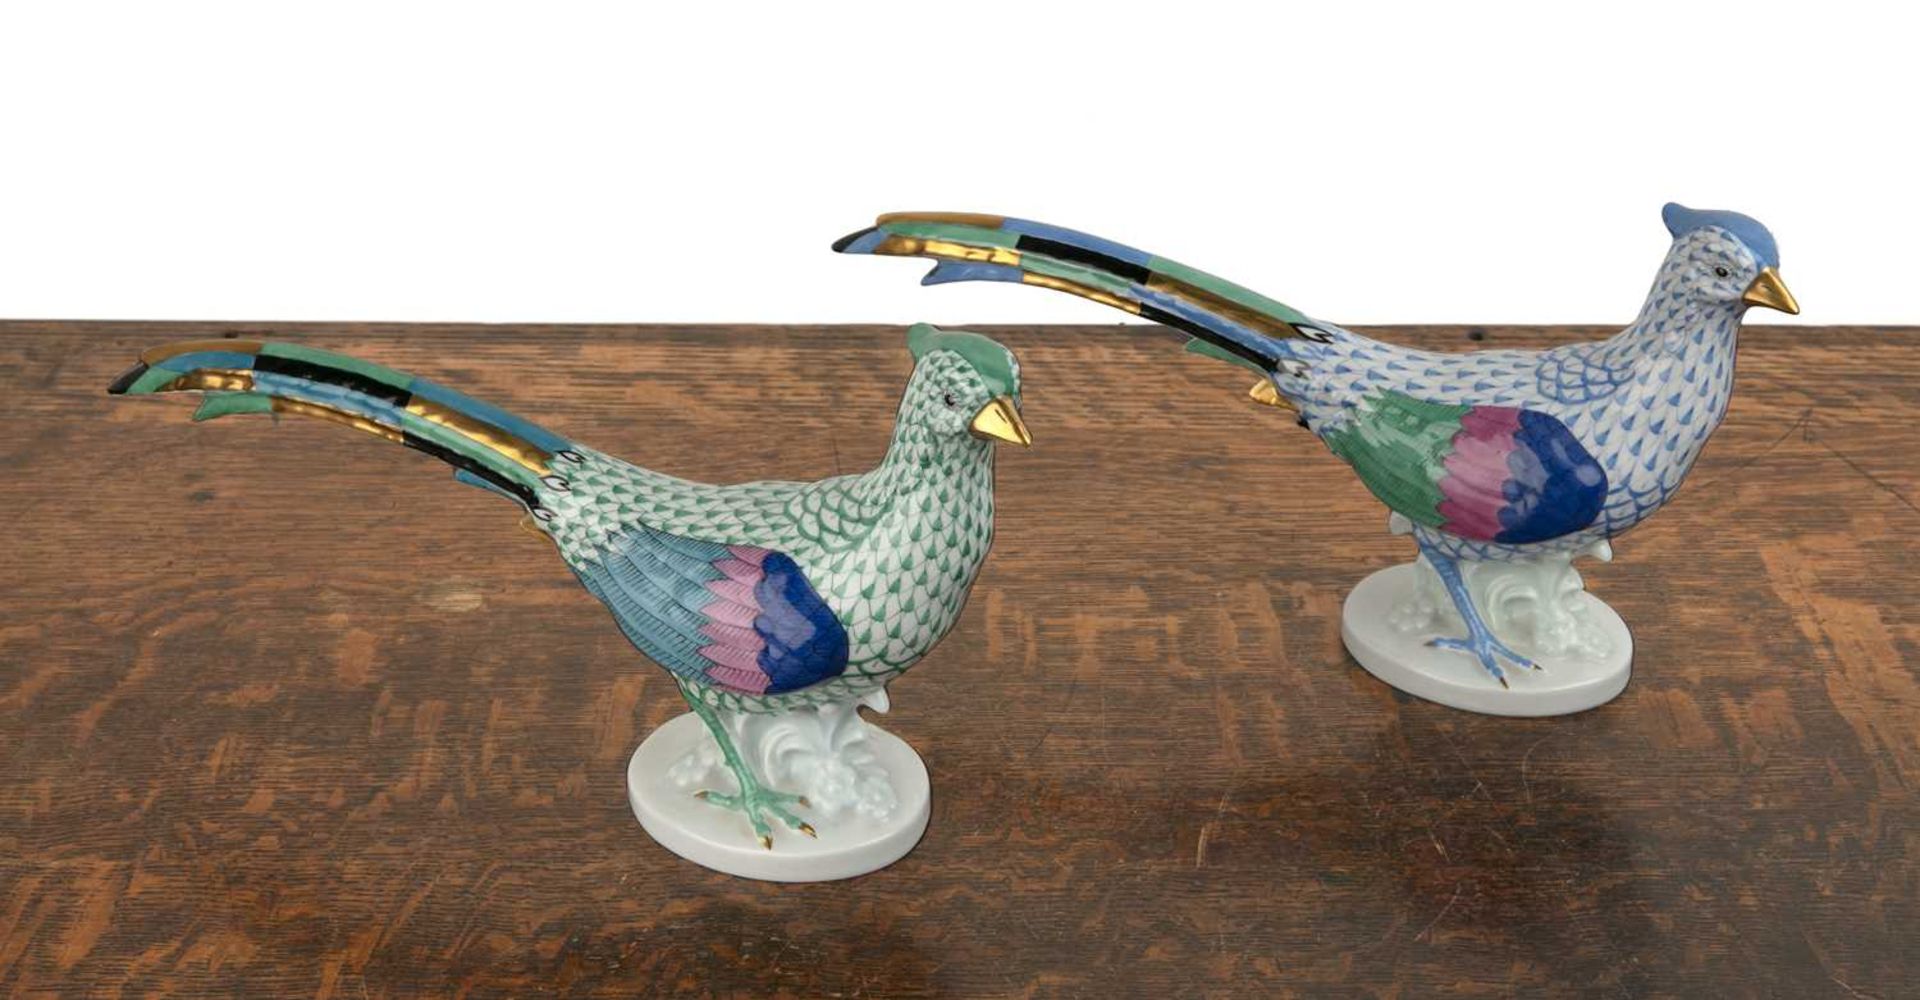 Pair of Herend porcelain pheasants decorated mainly in blue and green, with gilt highlights, printed